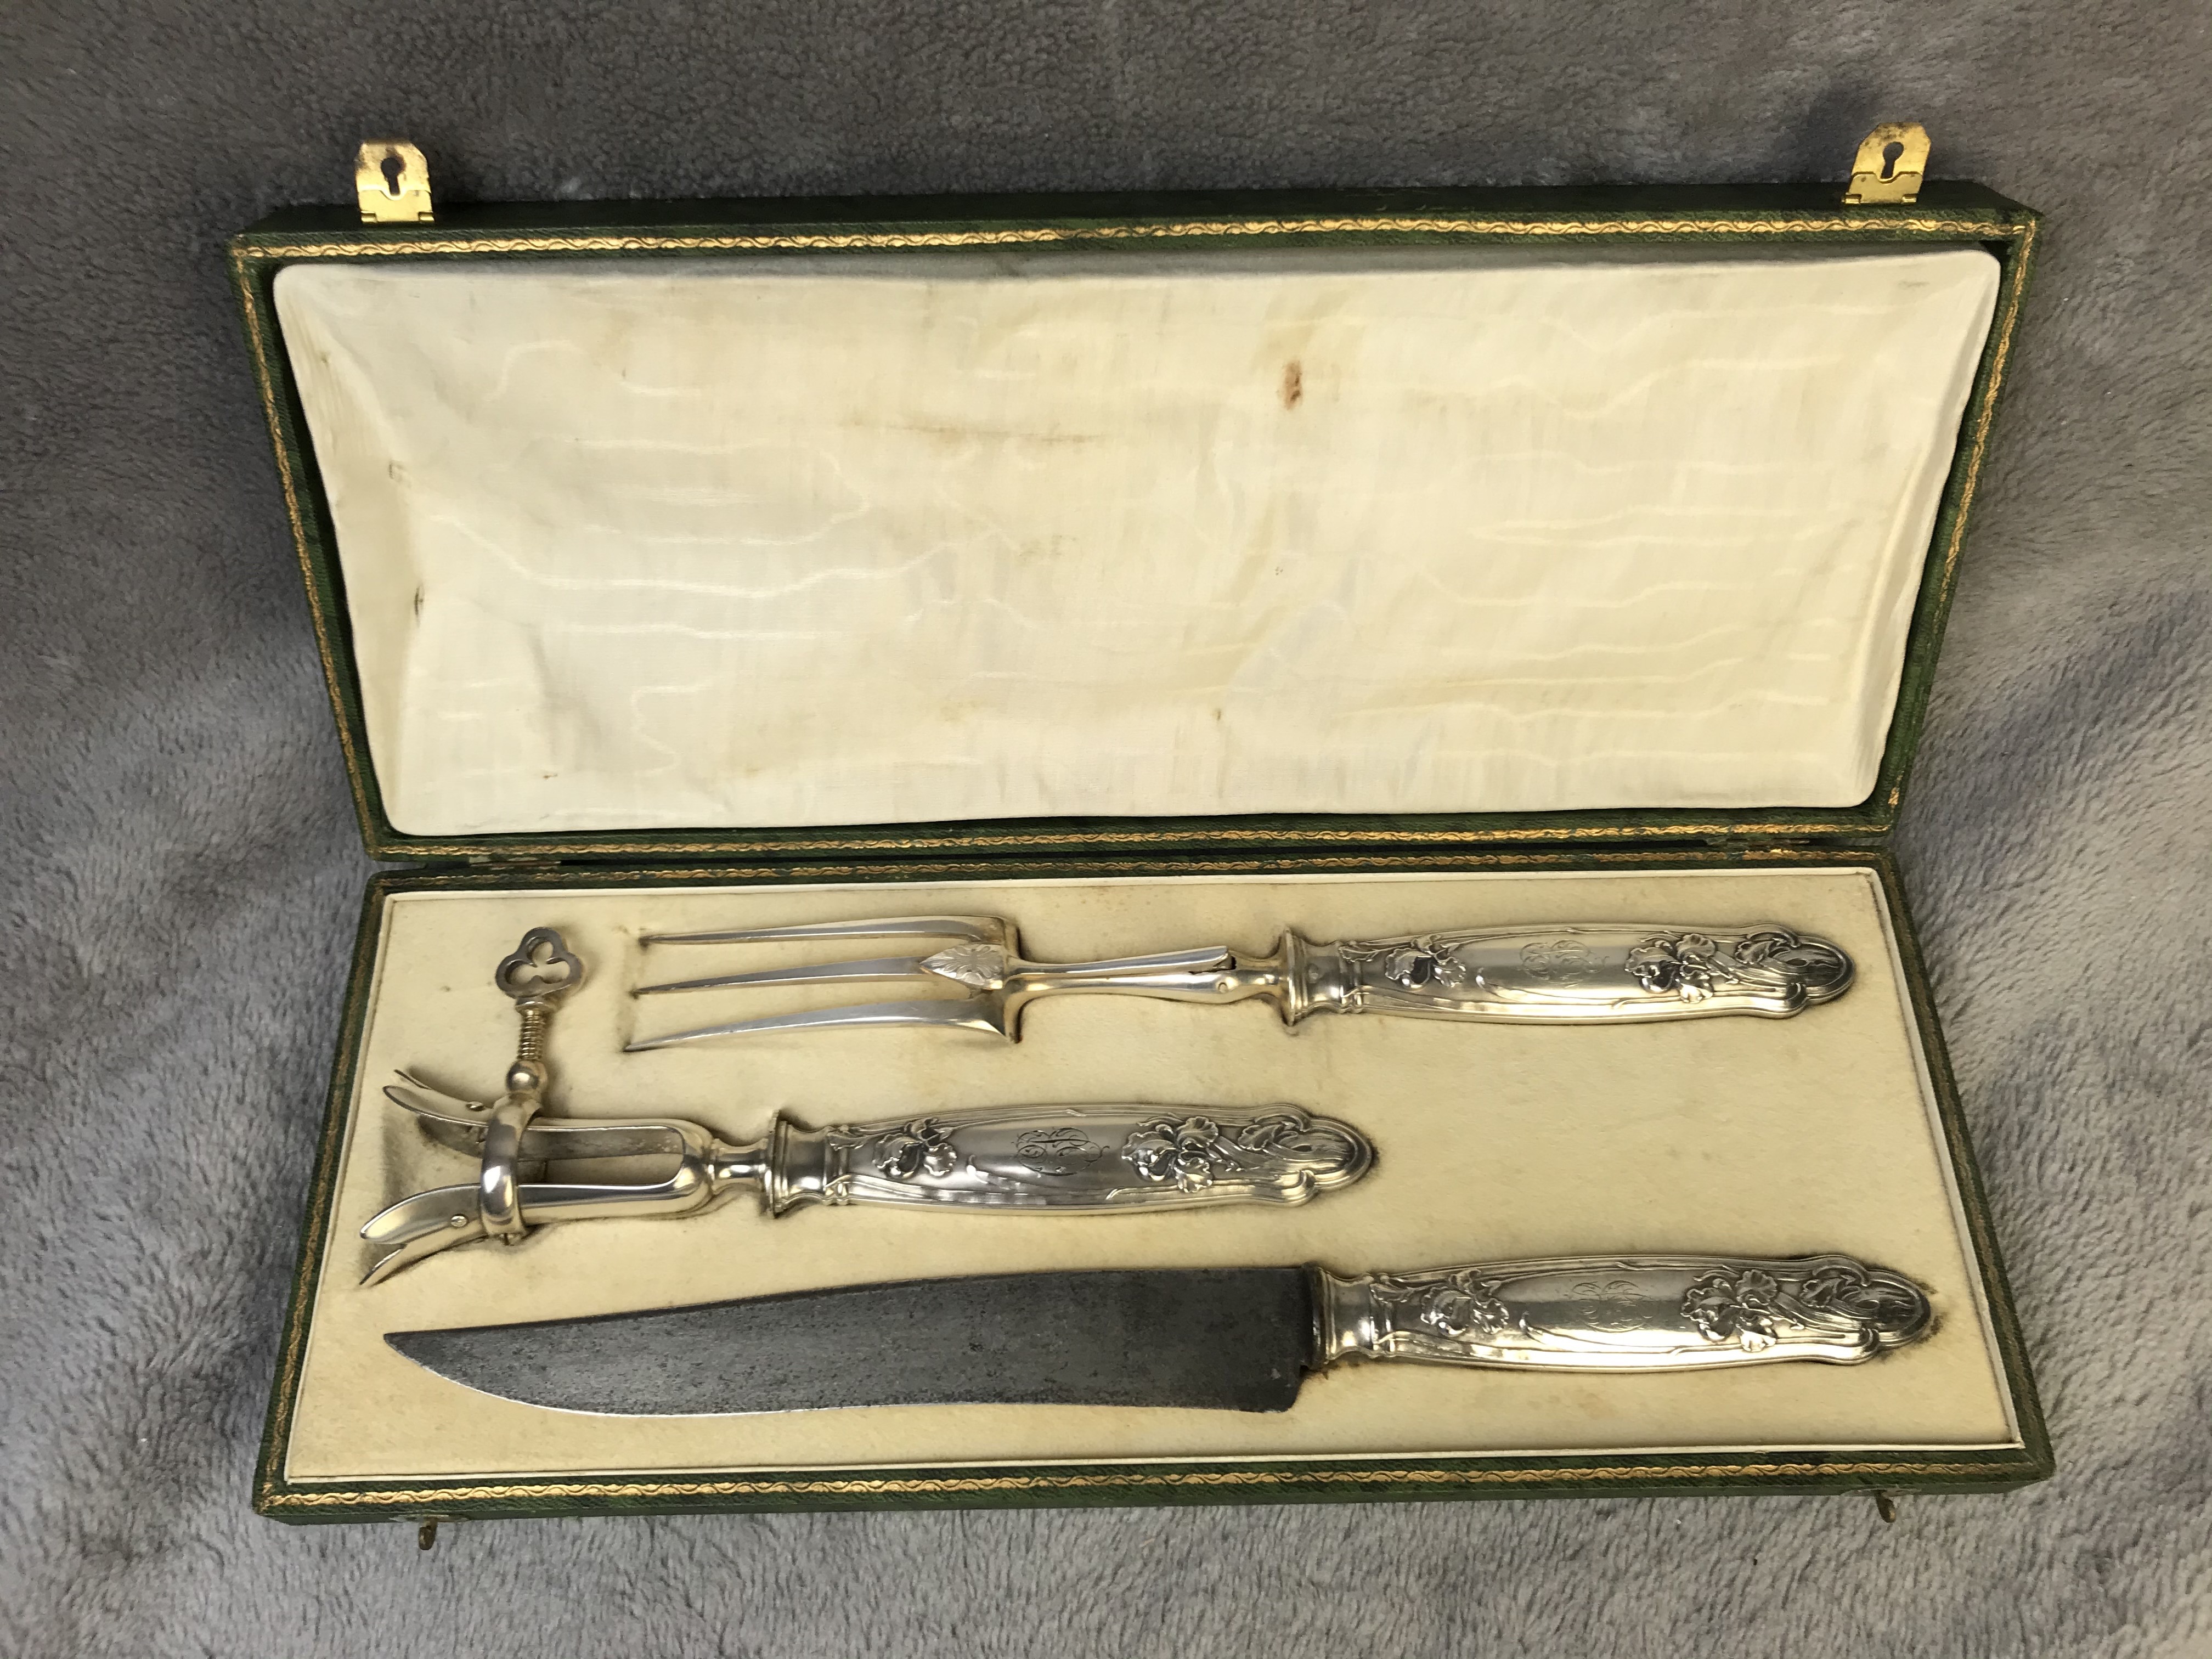 3 PC. FRENCH SILVER CARVING SET